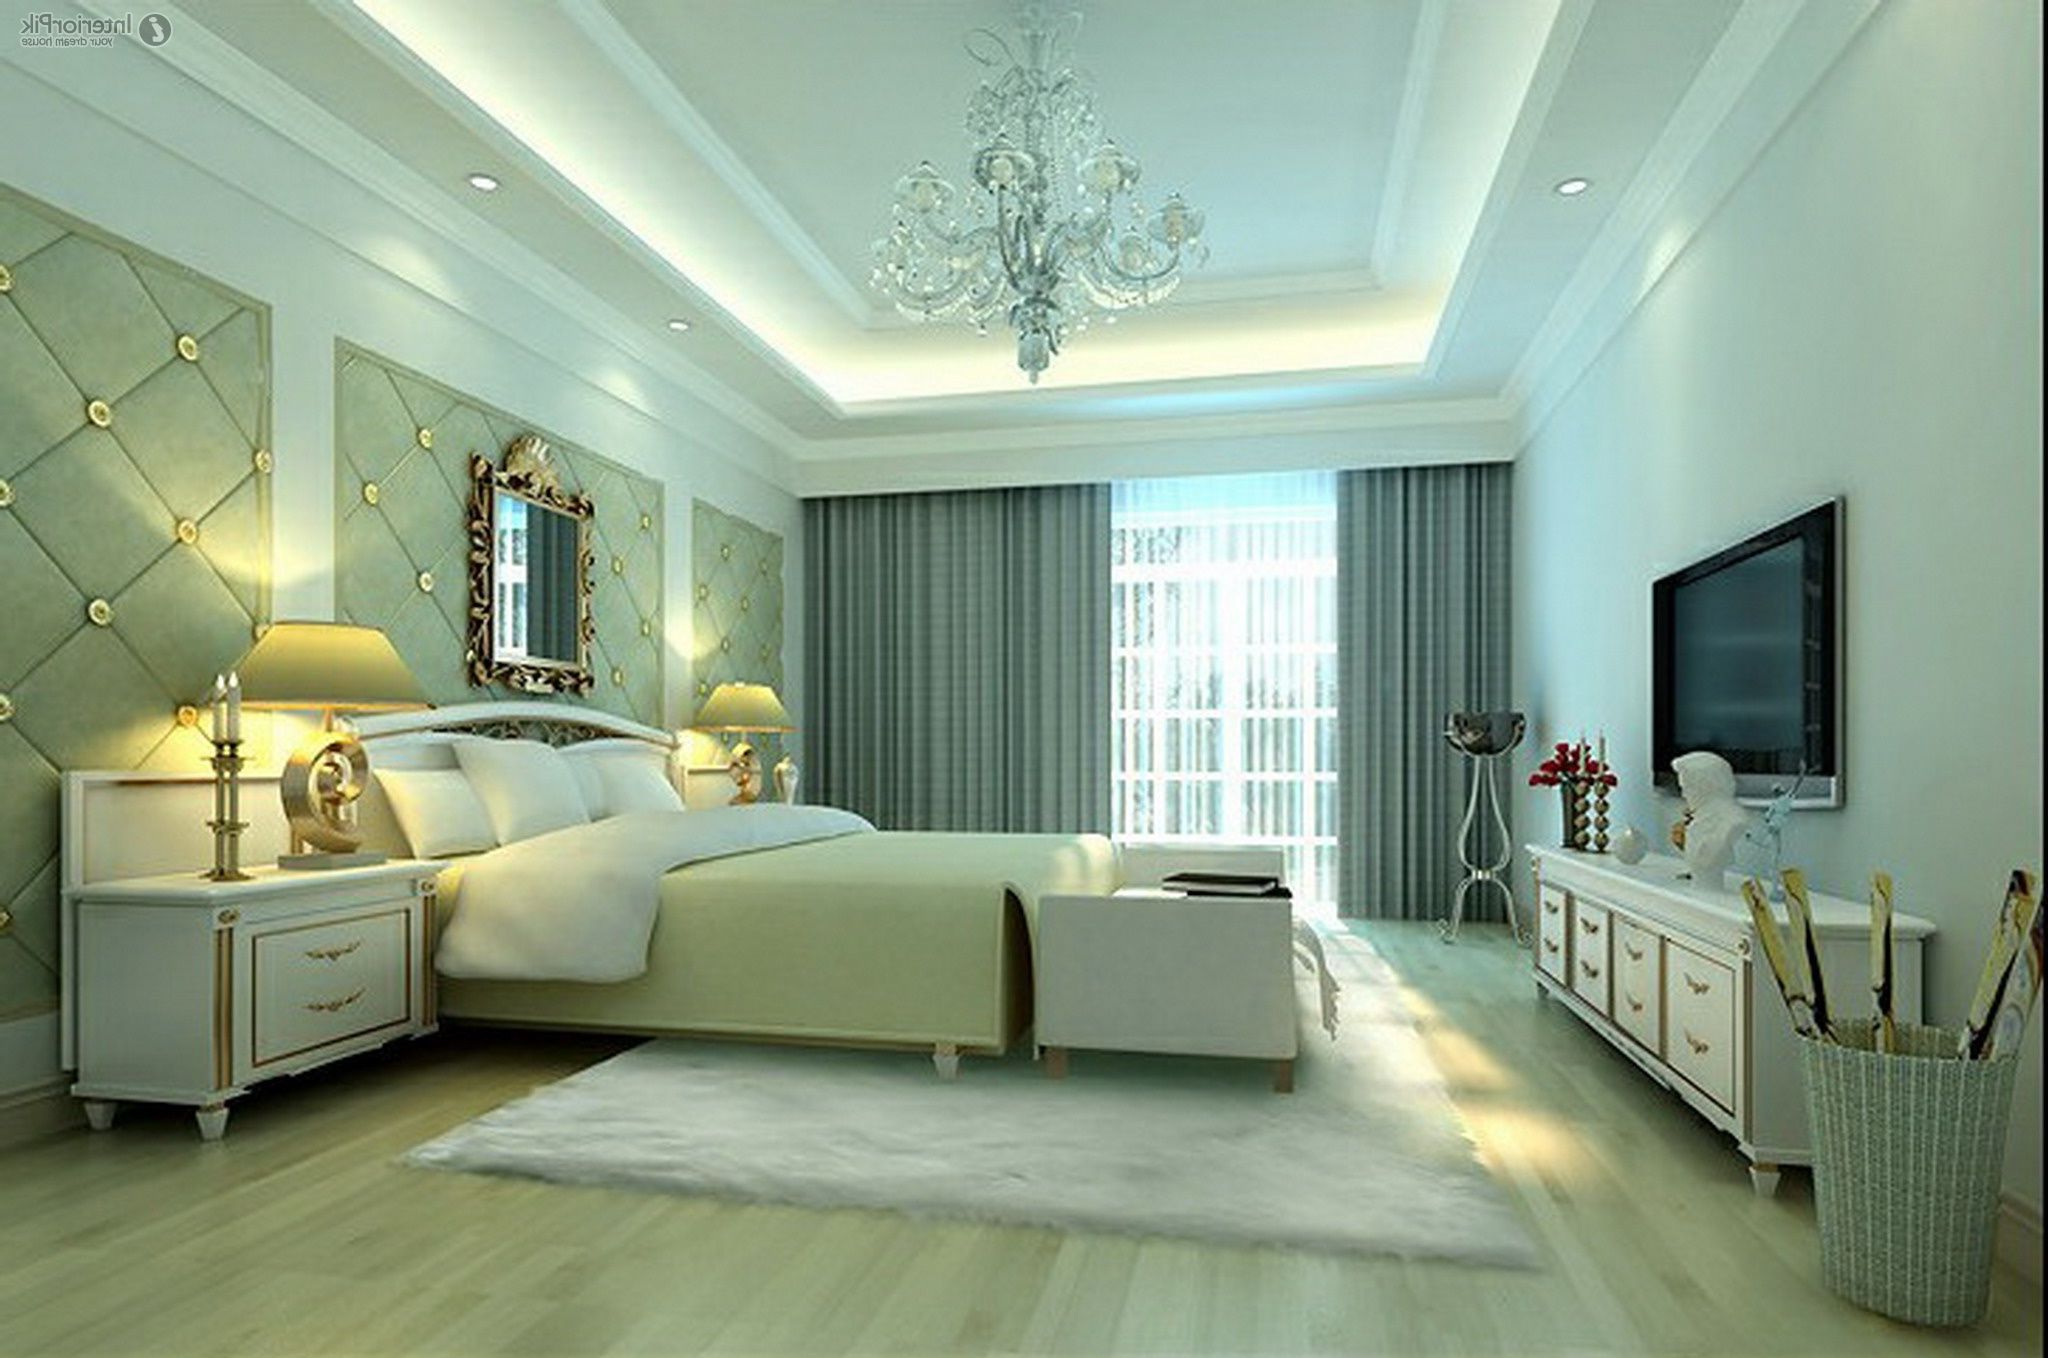 Ceiling Artistry: Unleash Creativity With Stunning Bedroom Ceiling Designs